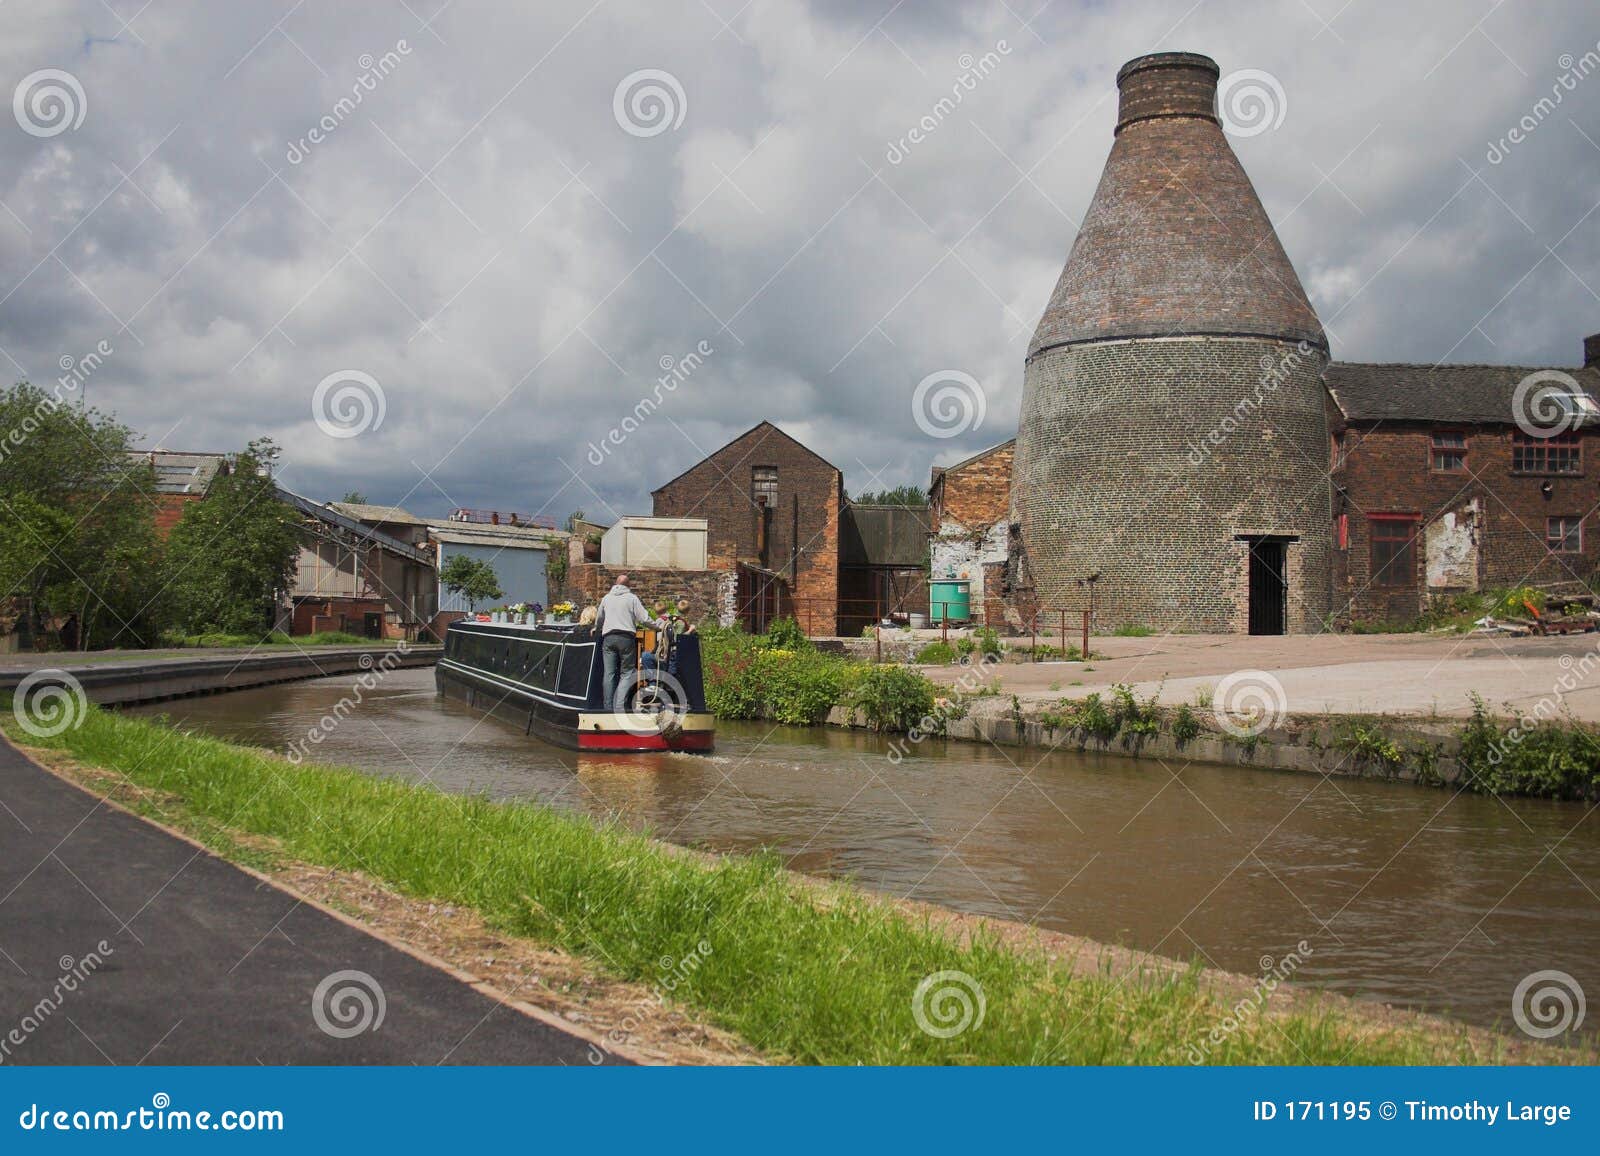 Bottle Kiln And Canal - Industrial England Royalty Free ...